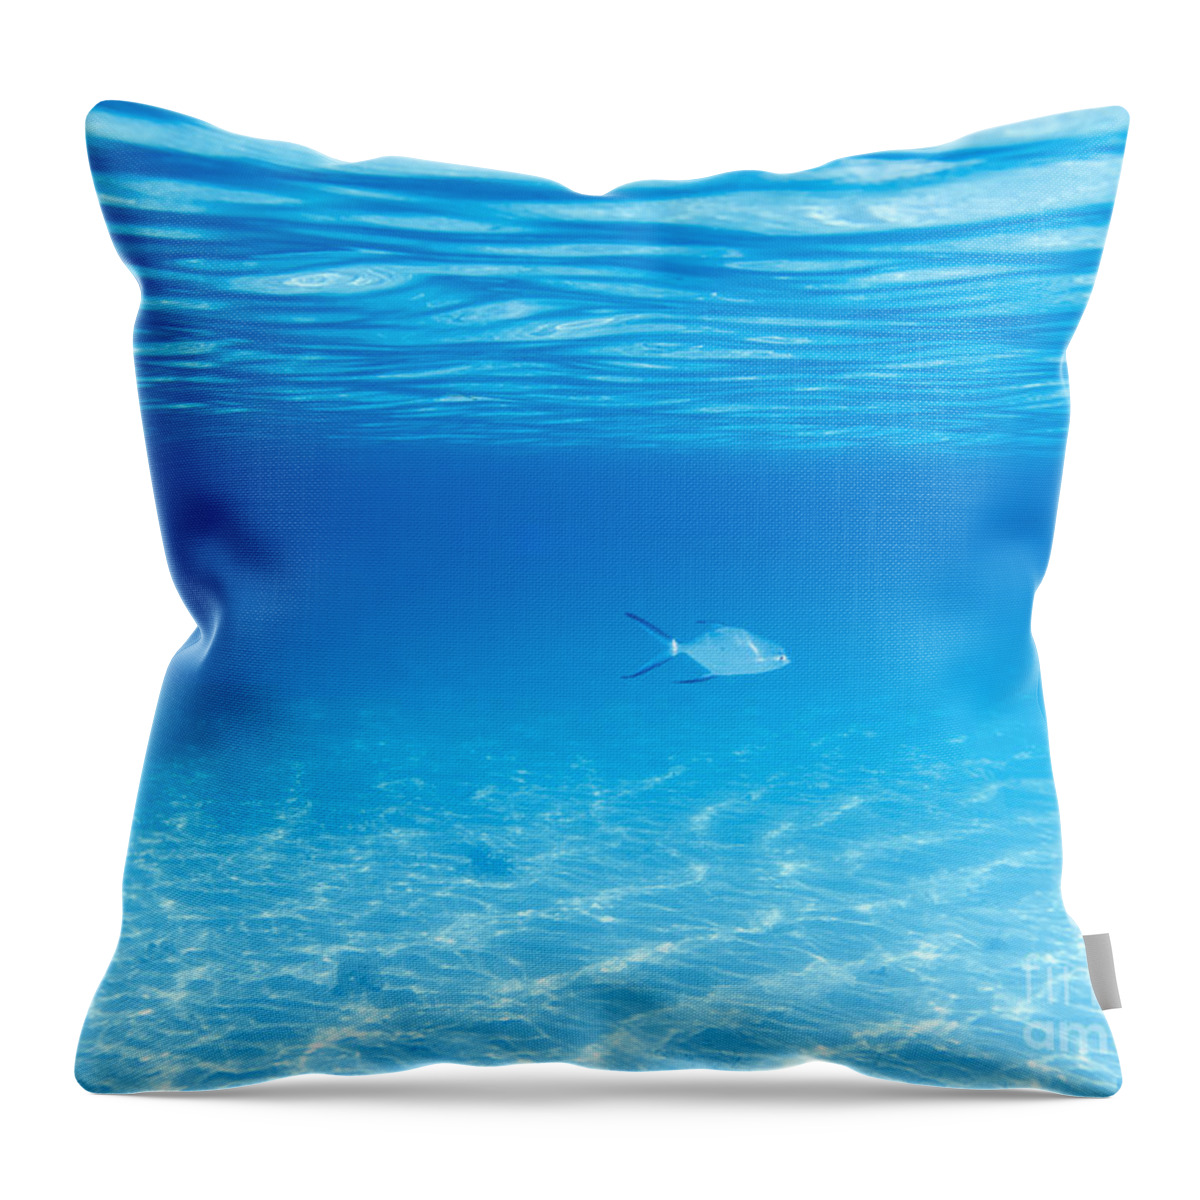 Underwater Throw Pillow featuring the photograph Underwater by MotHaiBaPhoto Prints